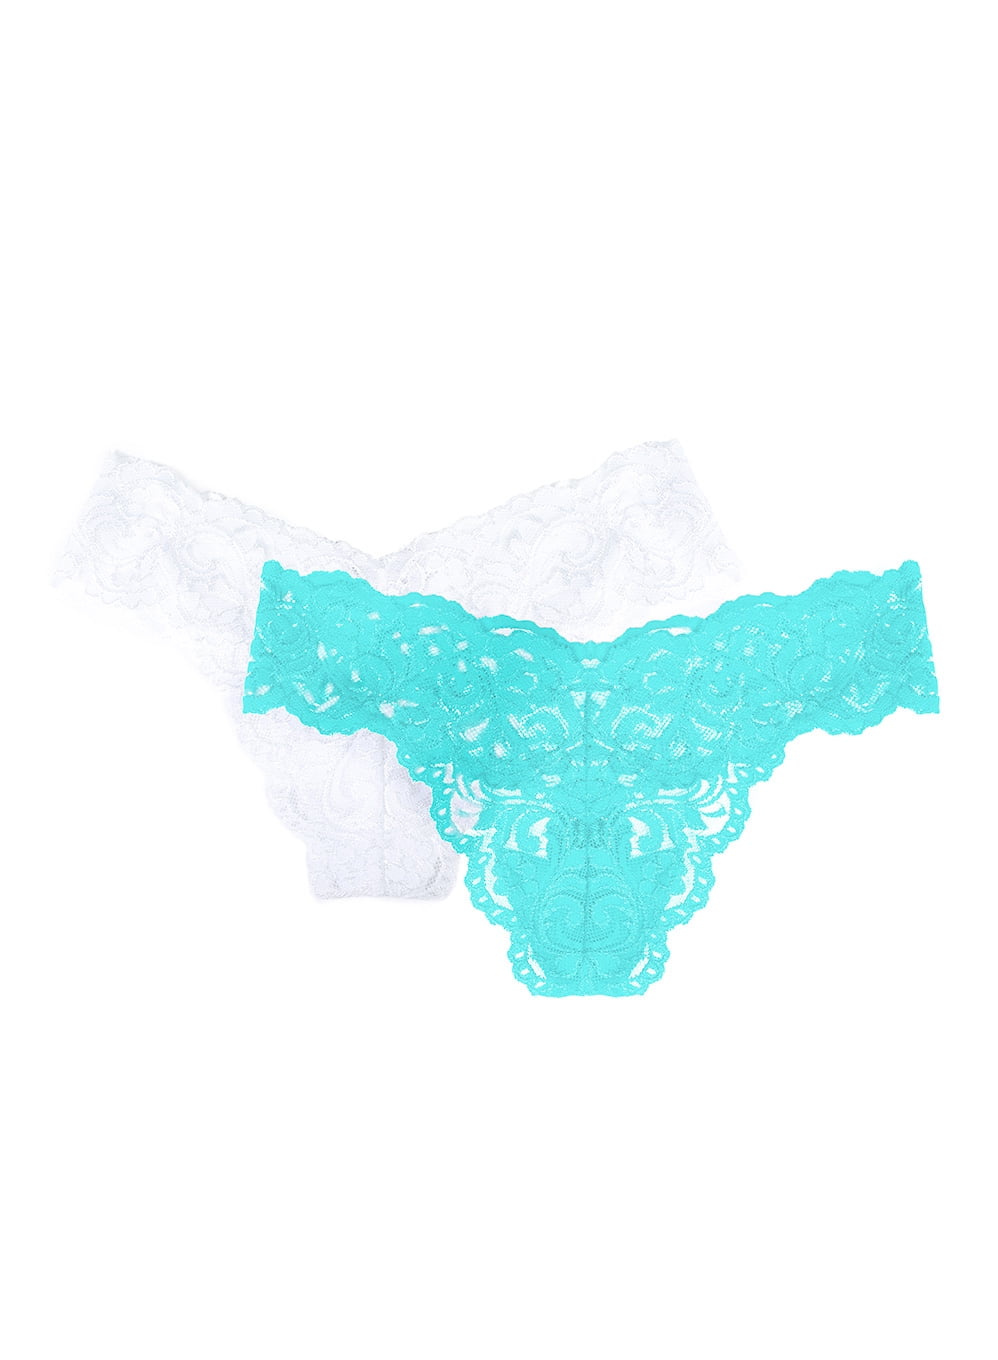 Smart & Sexy Women's Signature Lace Thong, 2-Pack, Style-SA849